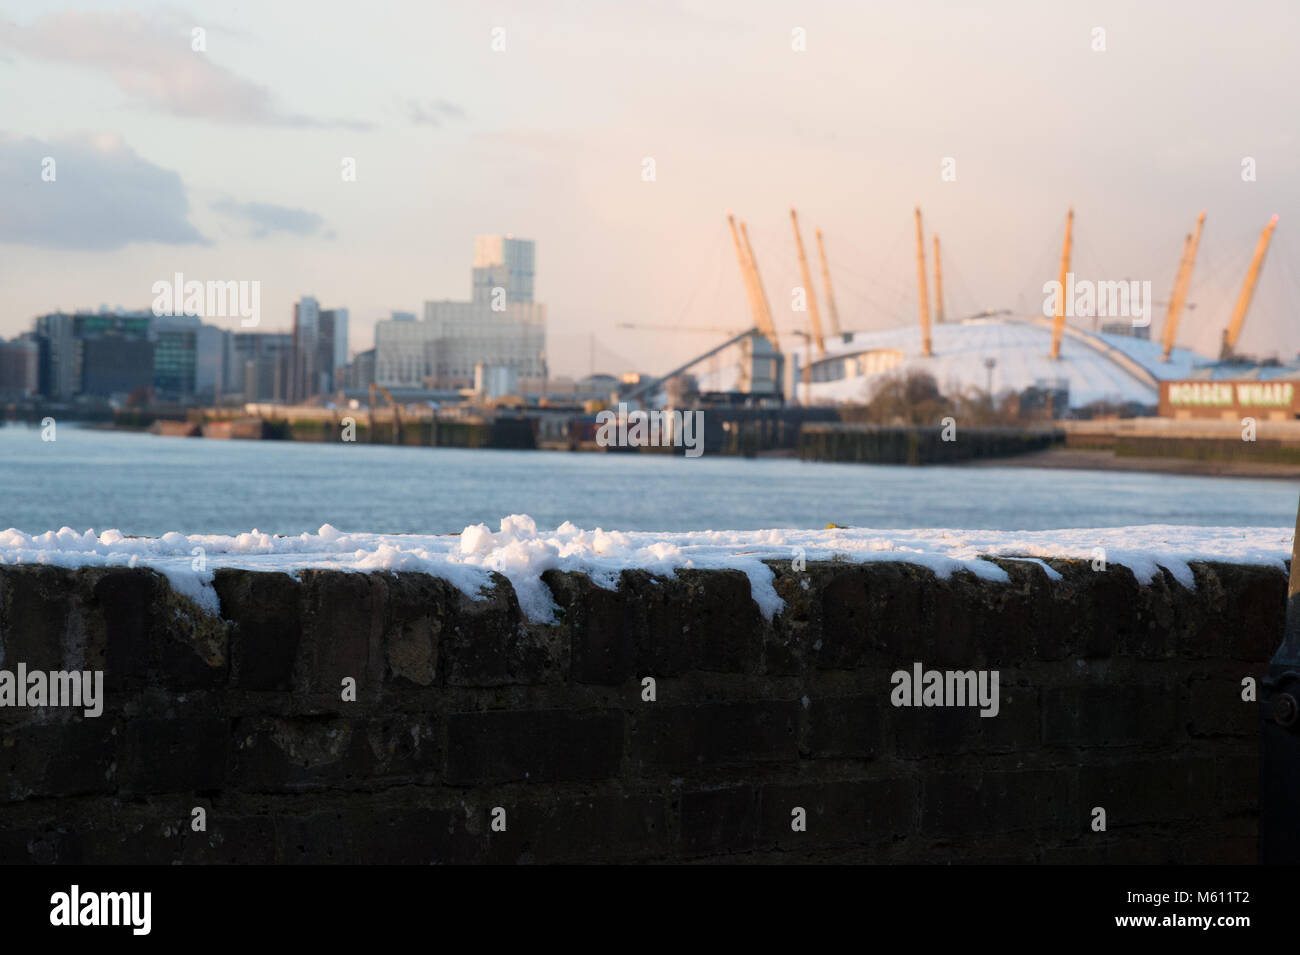 Greenwich, United Kingdom, 27th February, 2018. Snow blankets Greenwich after blizzards sees the 'beast from the east' arrive in London. Jon Blankfield/Alamy Live News Stock Photo